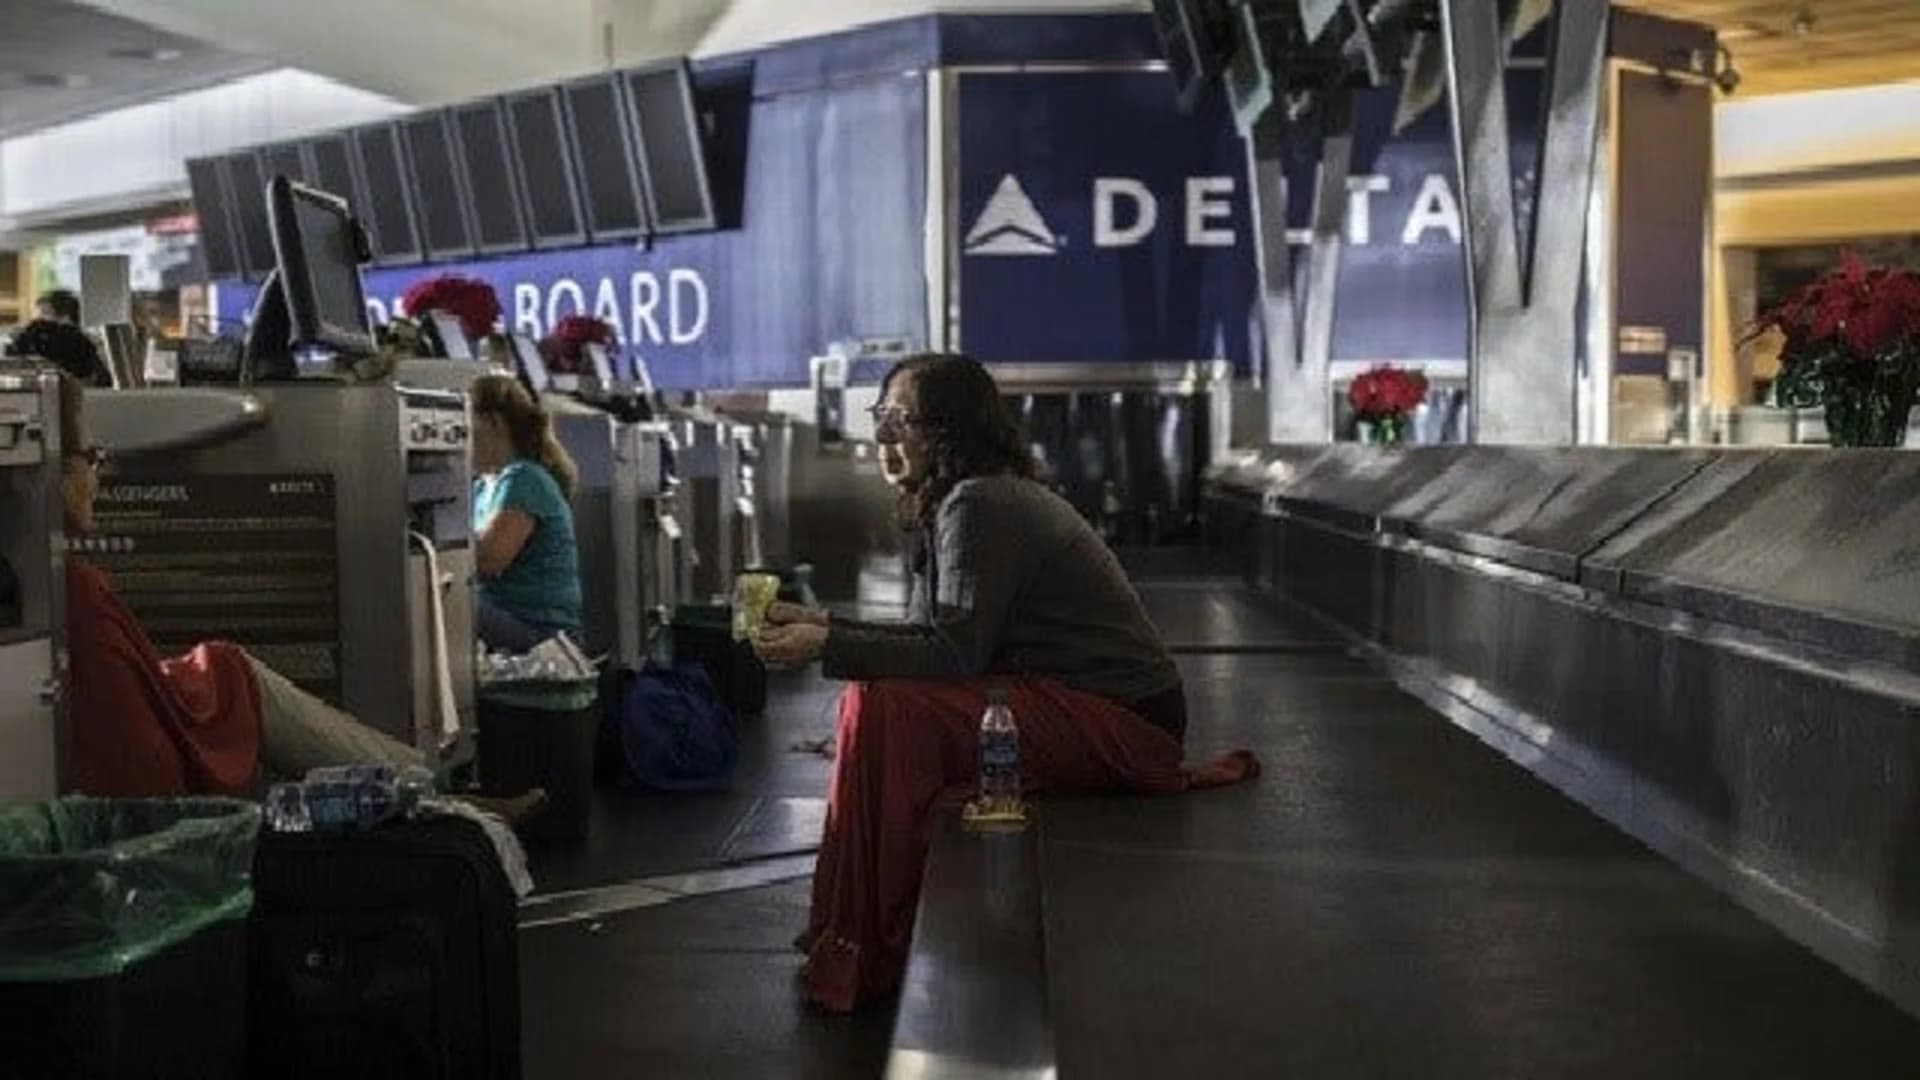 Holiday travel chaos ahead after Atlanta airport outage